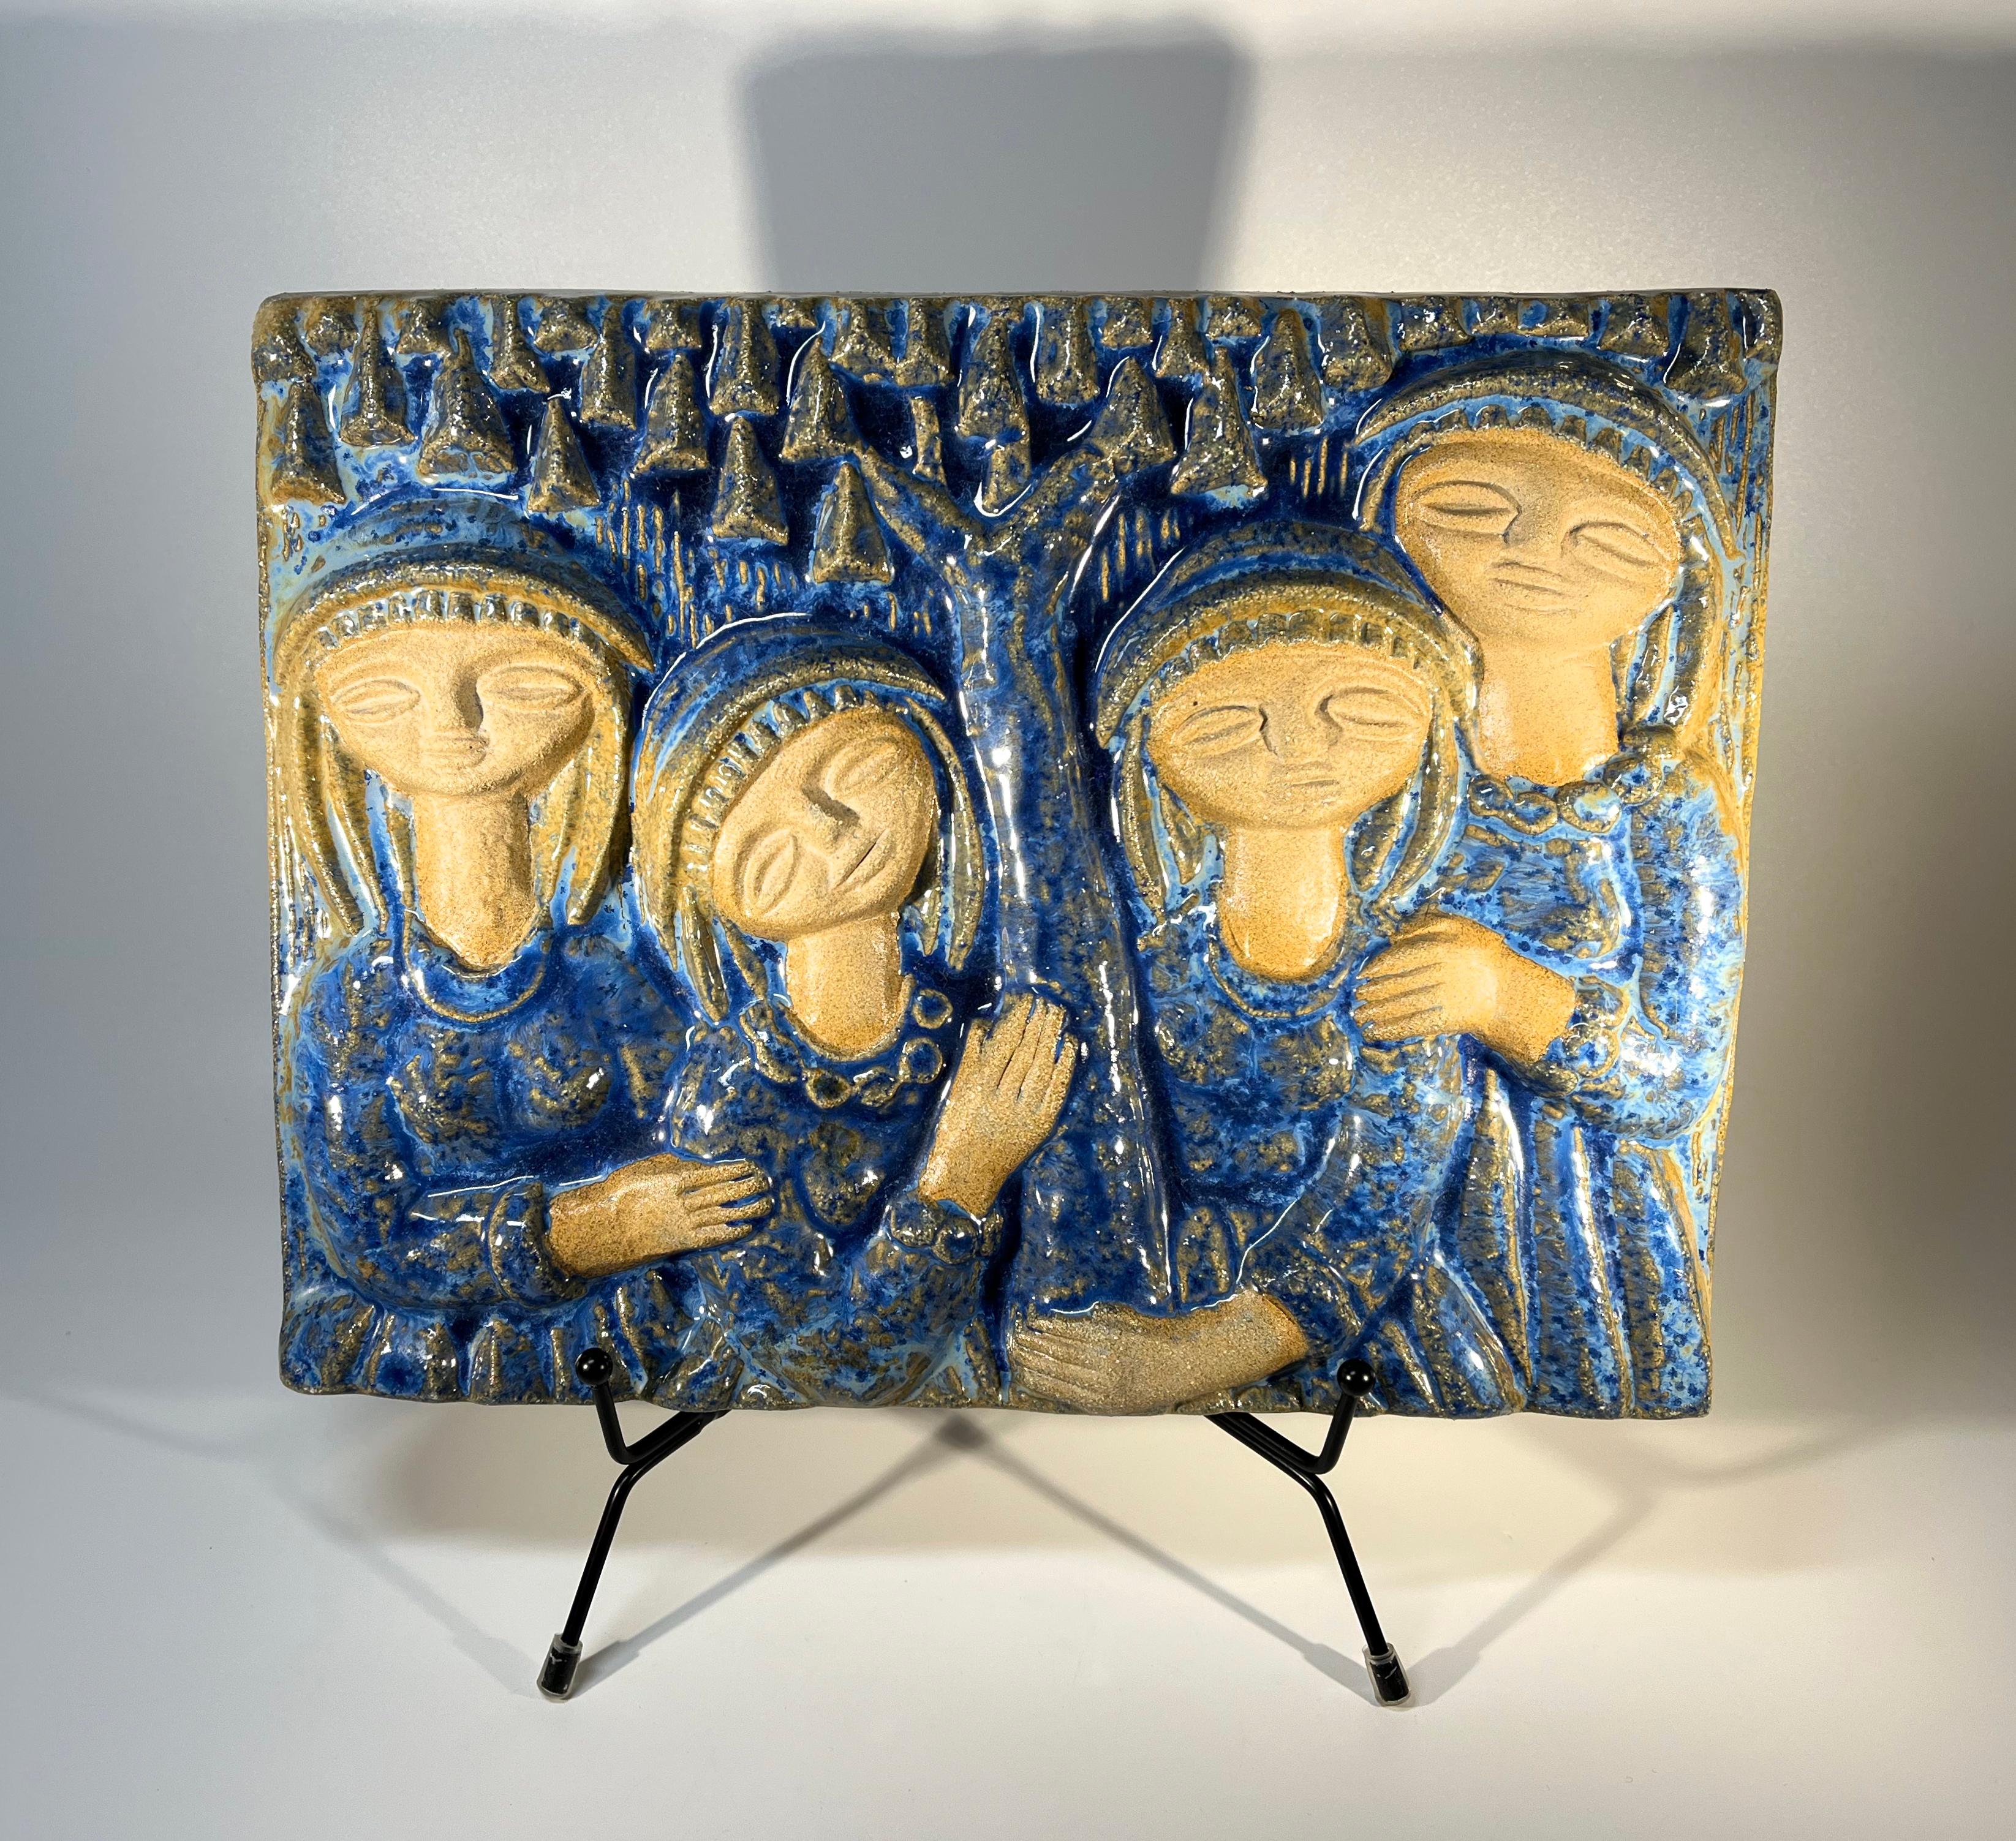 Four Soulful Women In Blue wall plaque, by Marianne Starck for Michael Andersen, Denmark 
Superb varying degrees of cobalt blue glaze over stoneware
Stamped MS, Three Herrings mark and #5842 on reverse
Width 11 inch, Height 9 inch, Depth 1